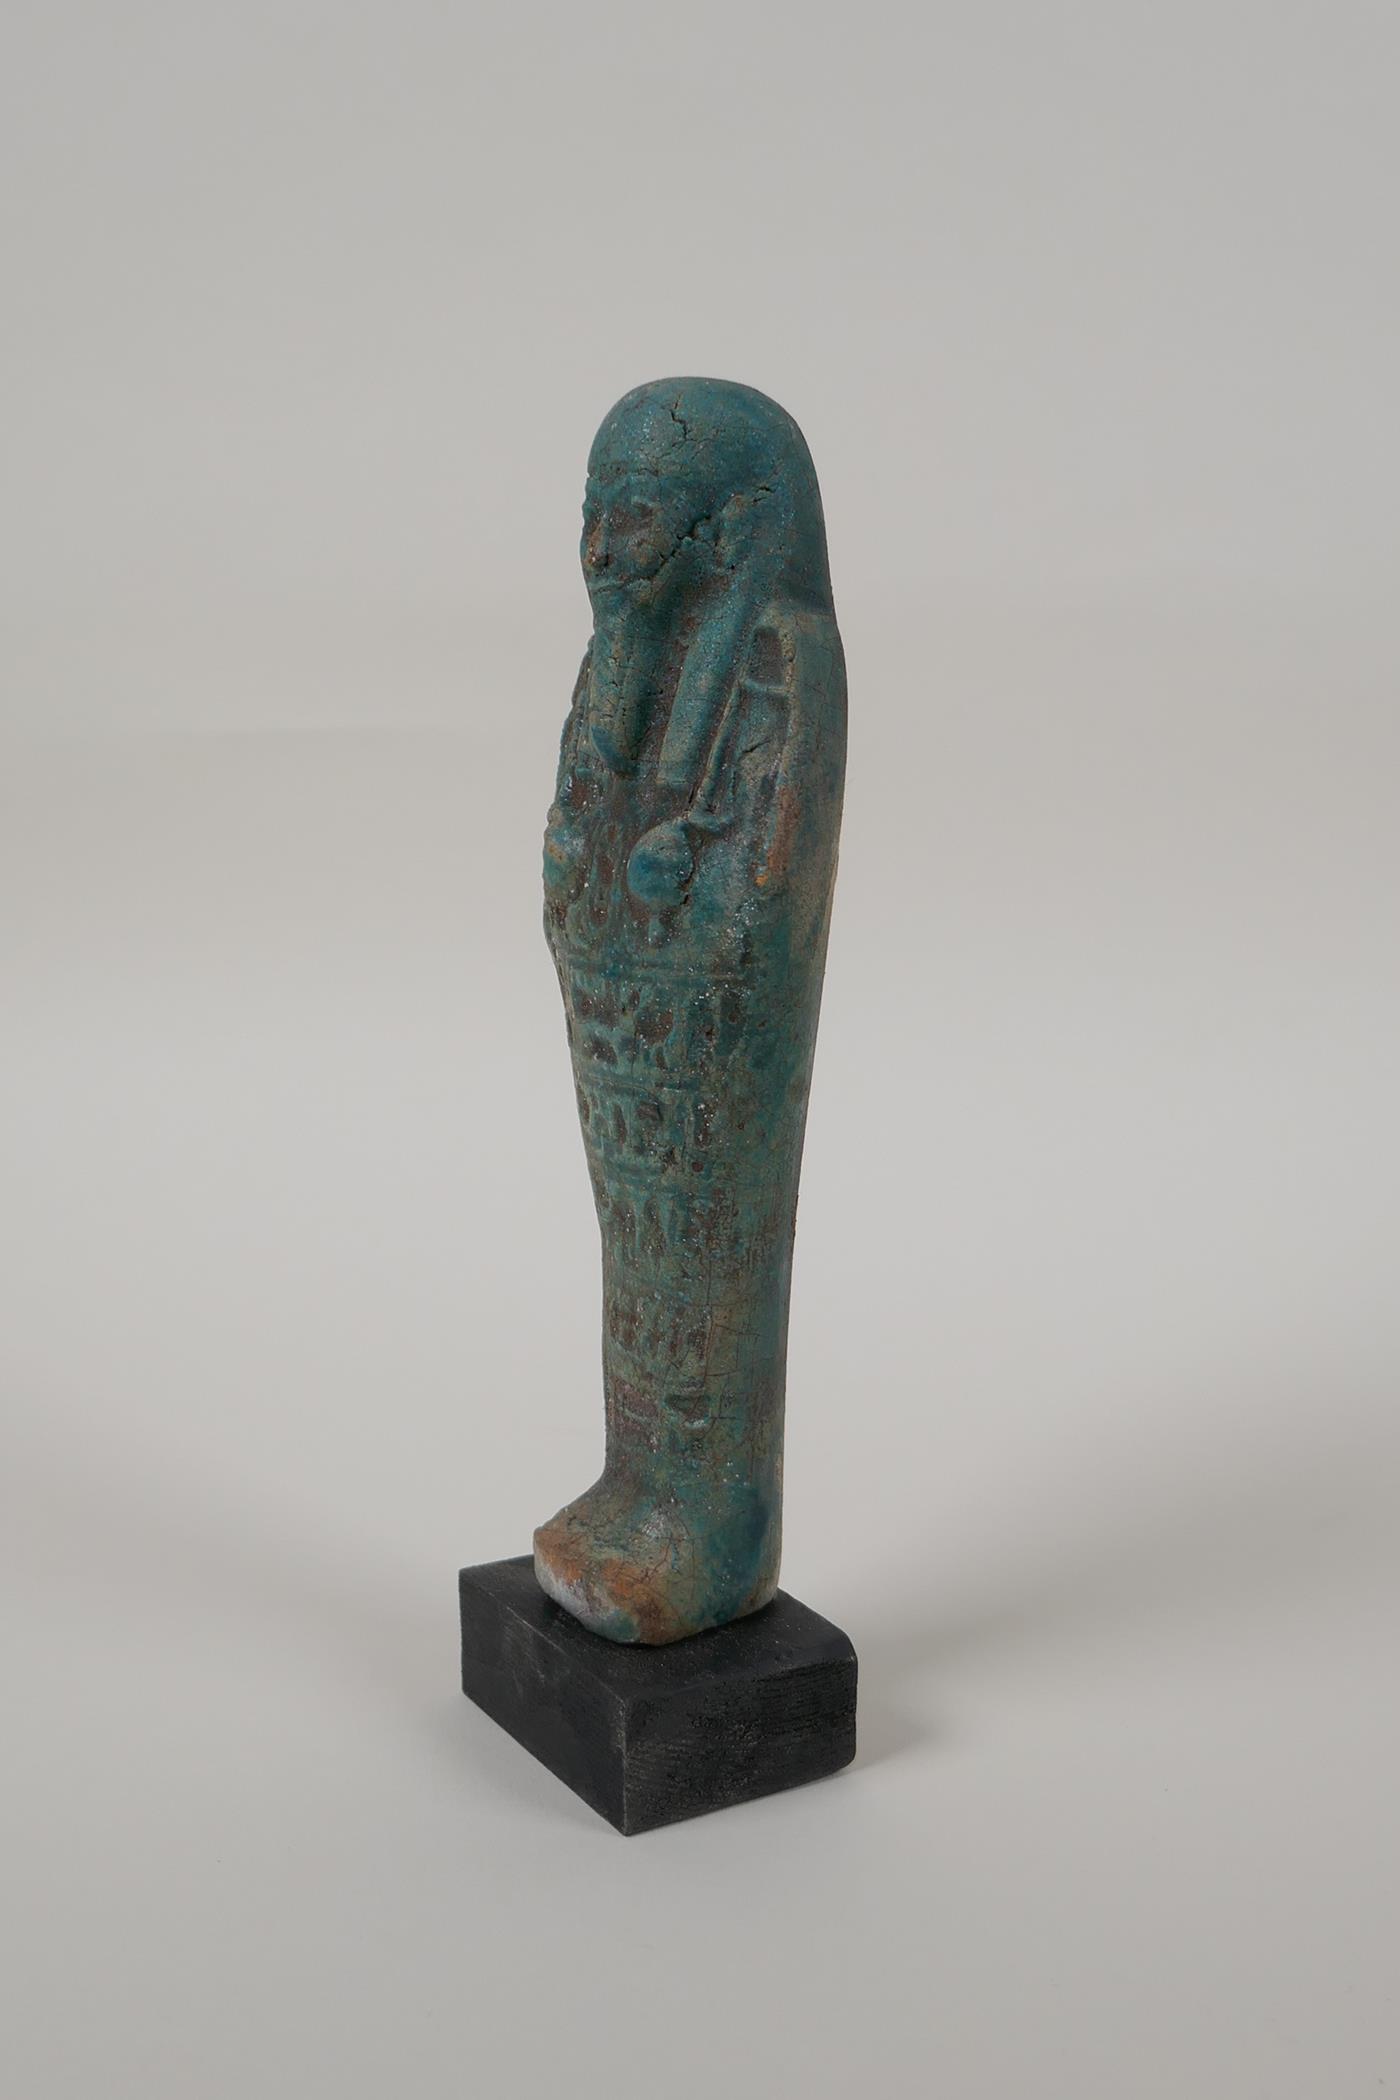 An Egyptian turquoise glazed faience shabti, mounted on a display base, 7" high - Image 5 of 5